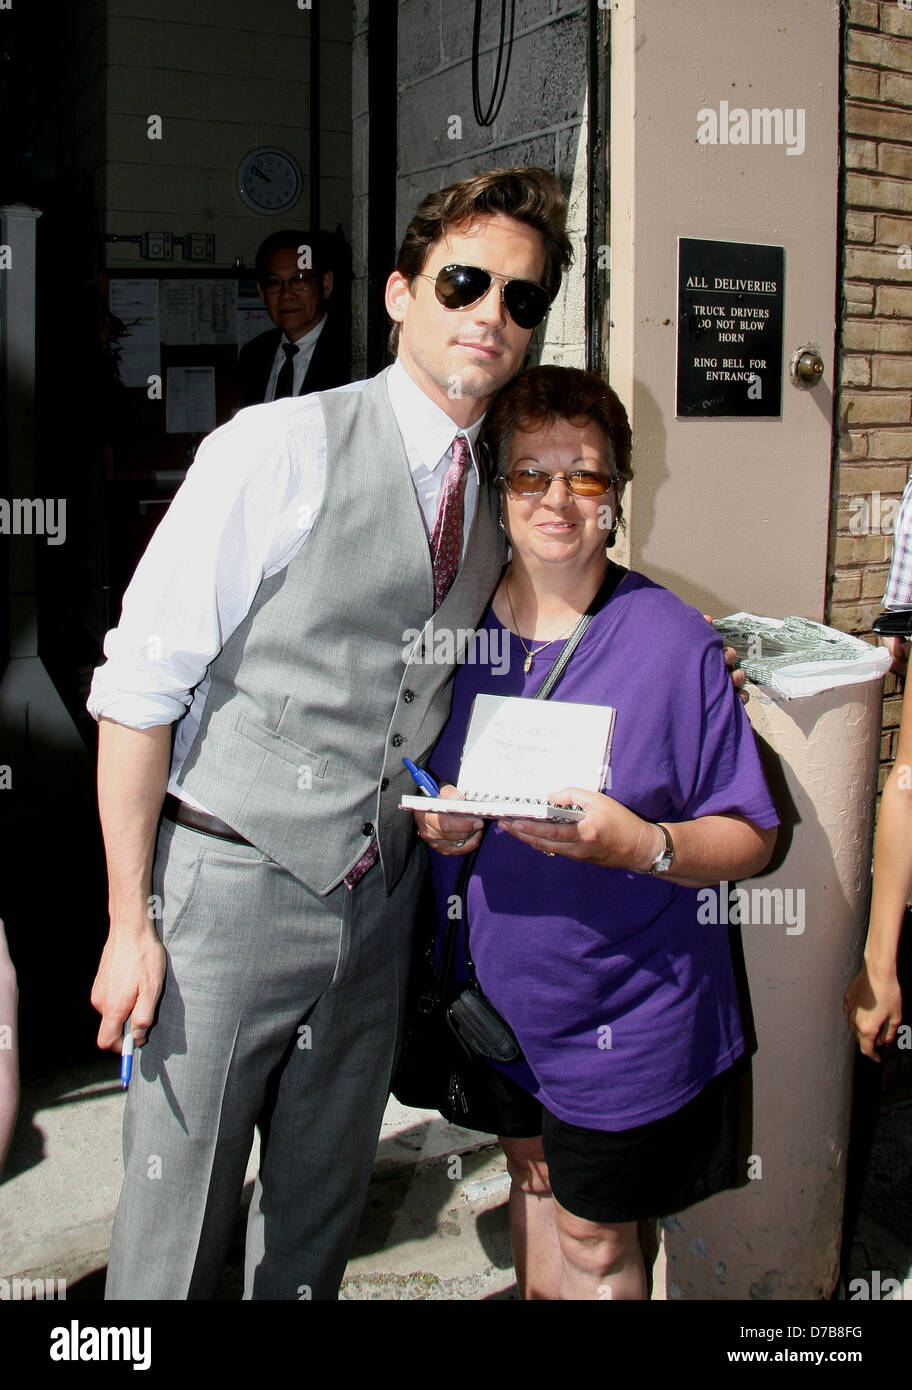 Asien tigger Utilgængelig Matt Bomer and fan leaving ABC studios after appearing on the 'Live with  Regis and Kelly Show' New York City, USA - 06-06-11 Stock Photo - Alamy